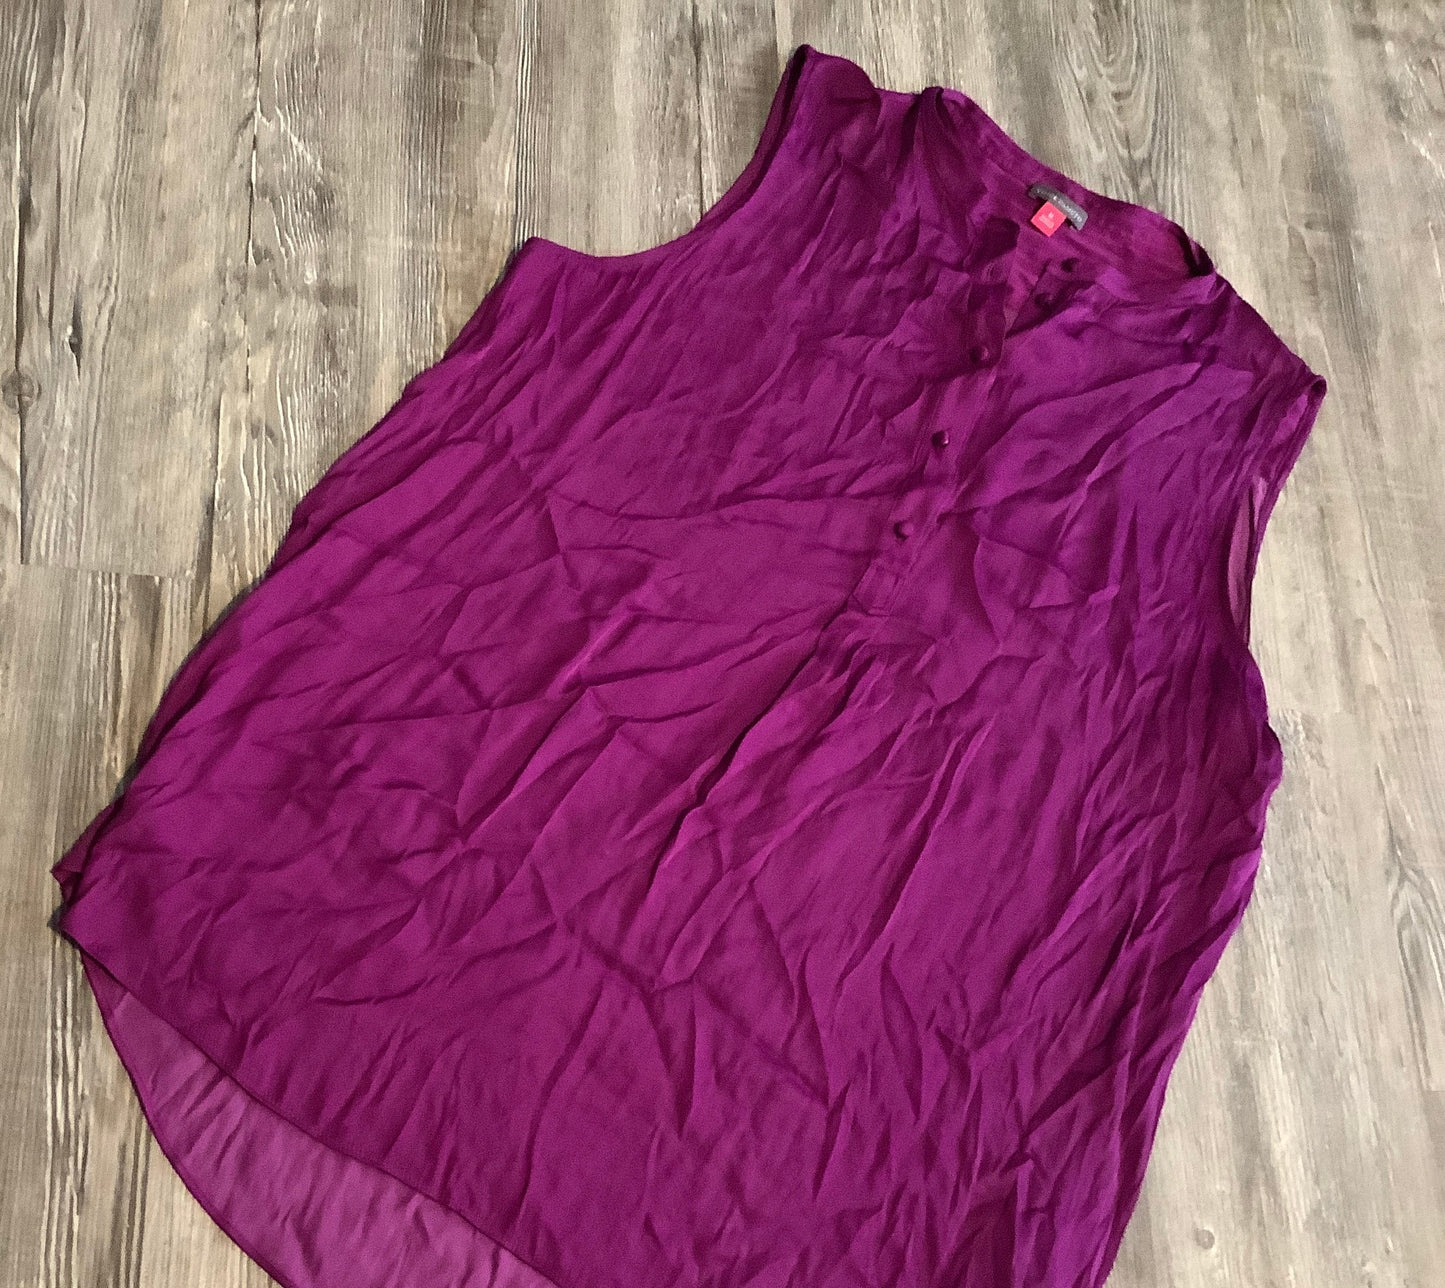 Top Cami By Vince Camuto  Size: Xl